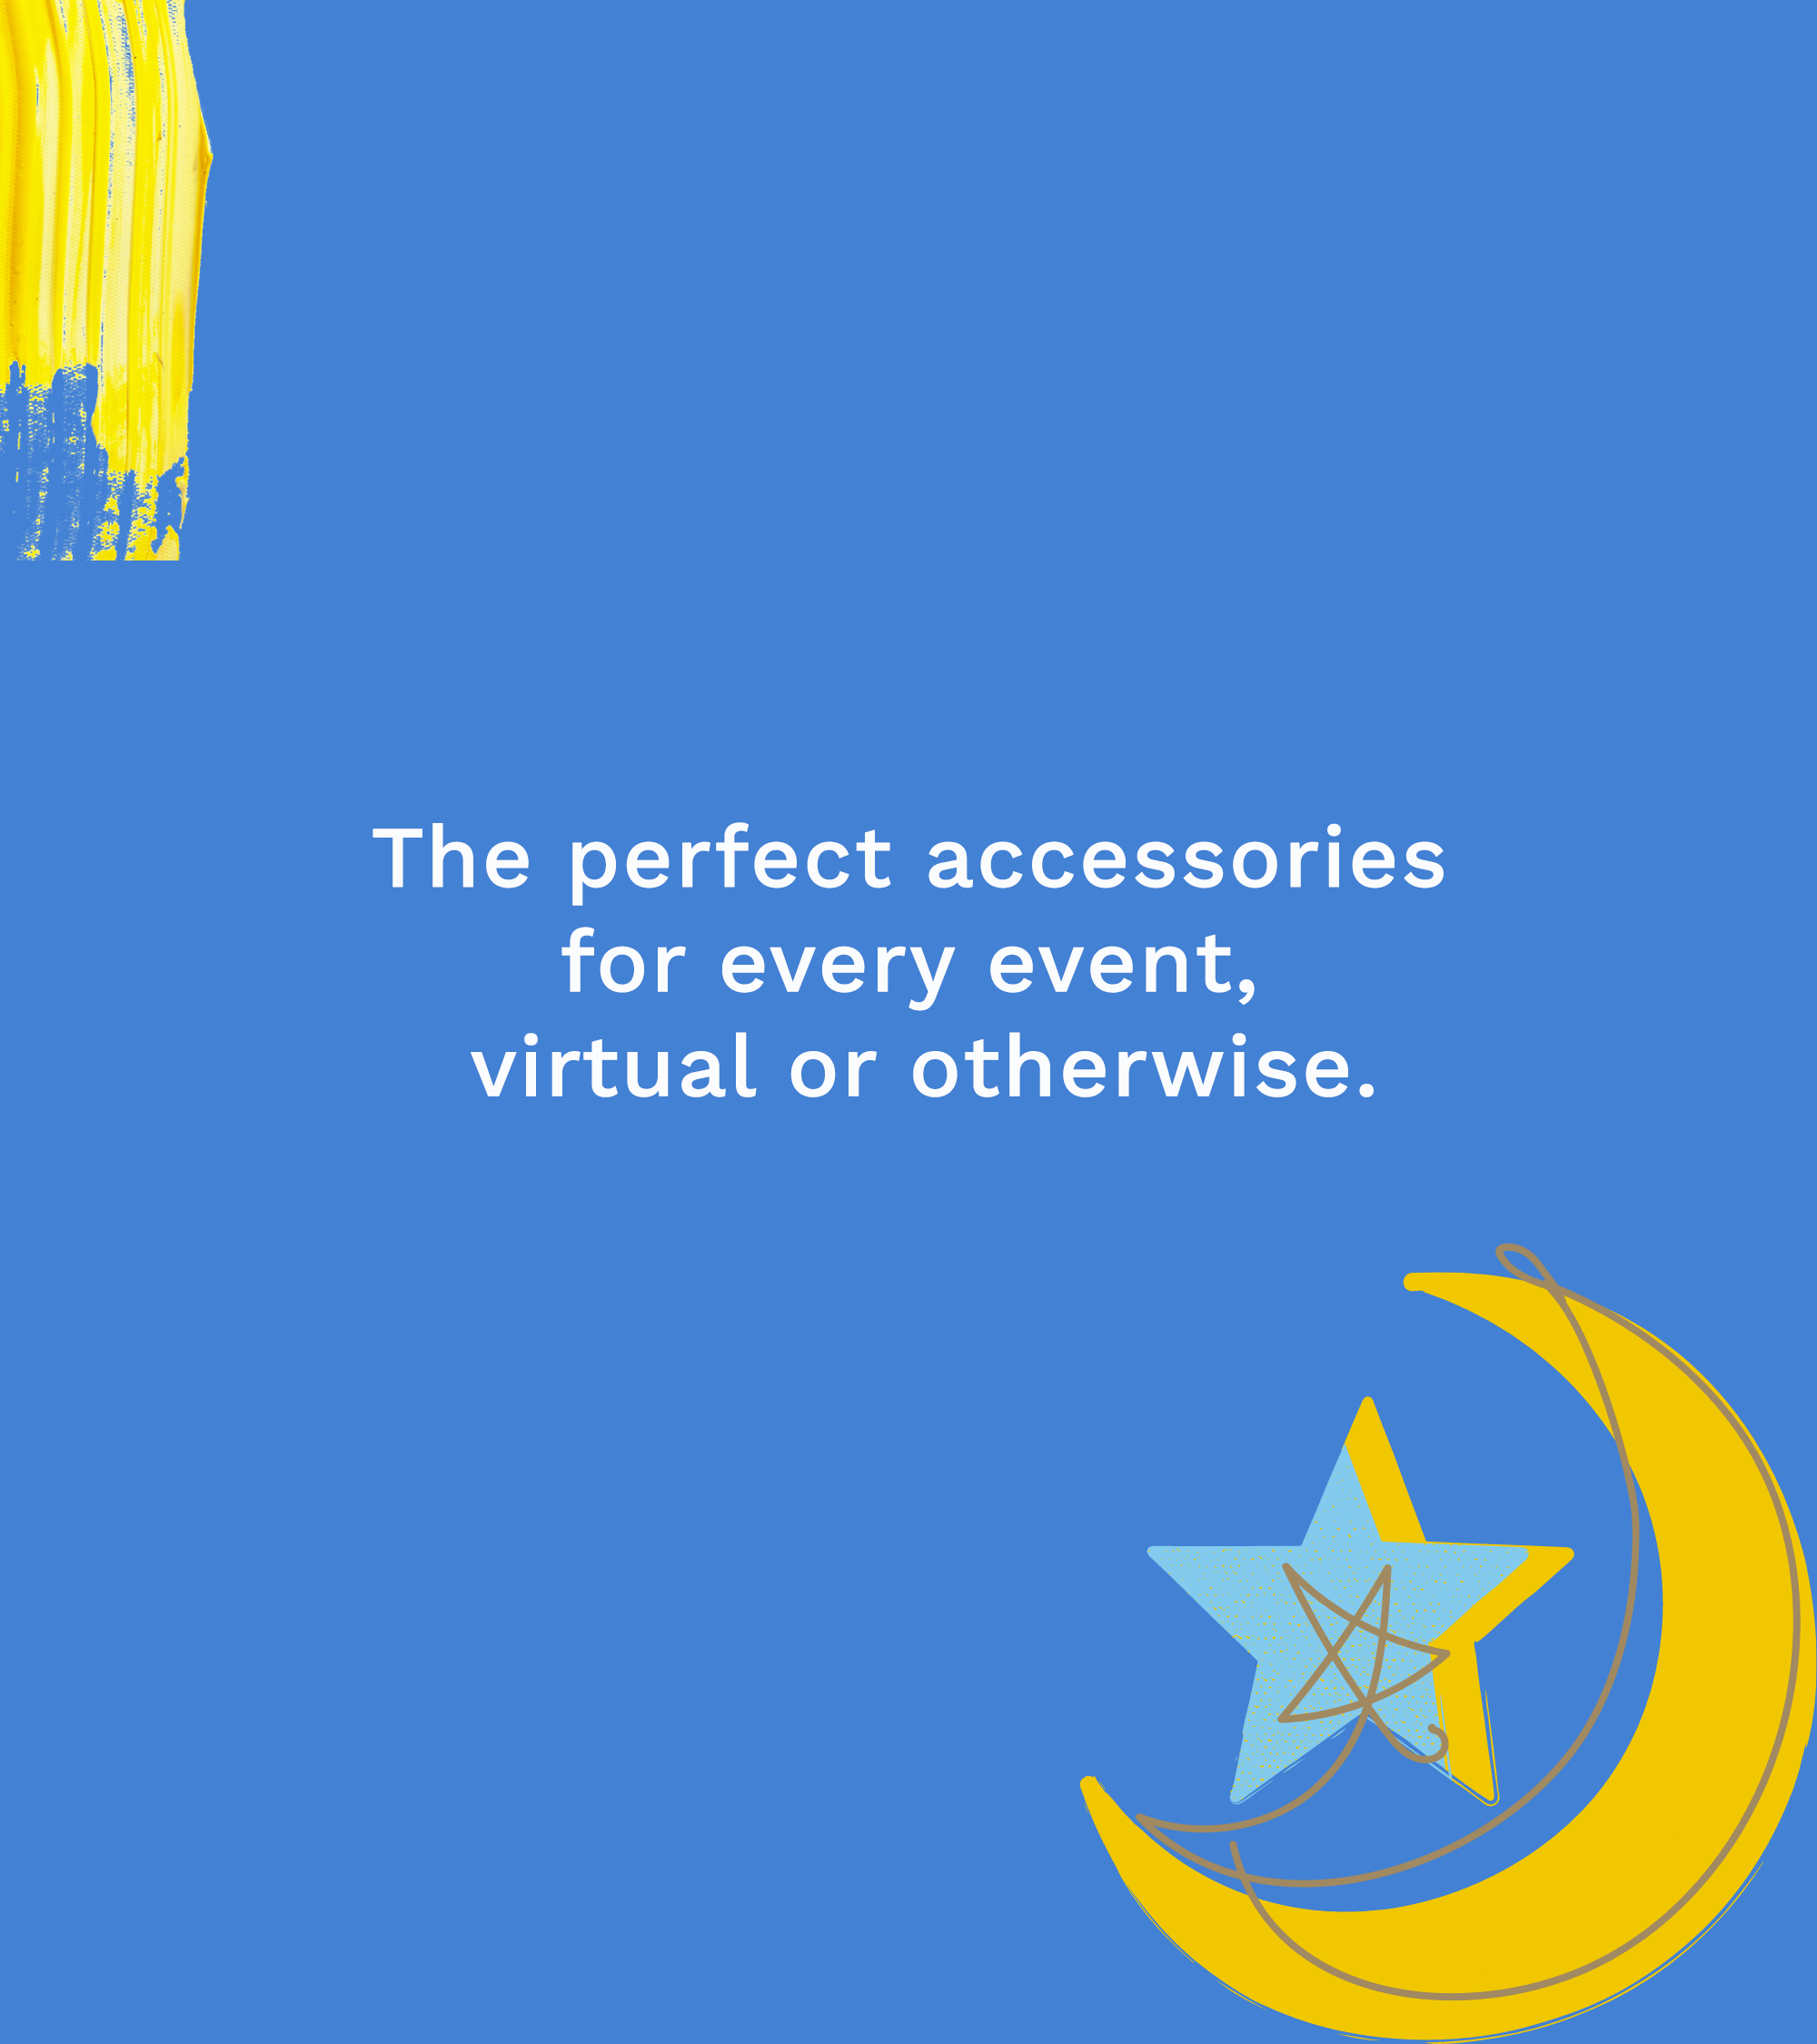 The perfect accessories for every event, virtual or otherwise.